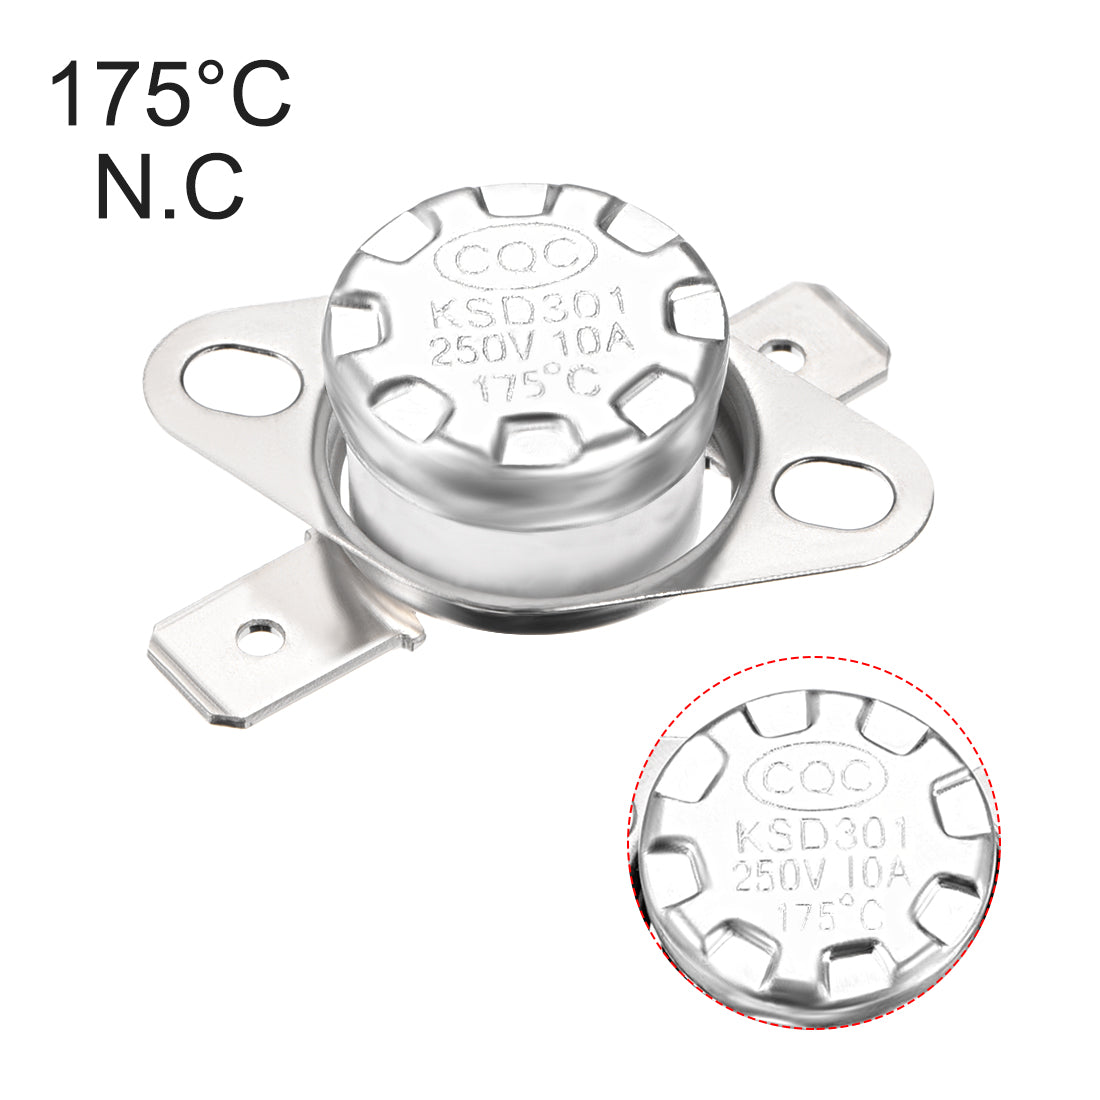 uxcell Uxcell Temperature Control Switch , Thermostat , KSD301 175°C , 10A , Normally Closed N.C 6.3mm Pin 5pcs